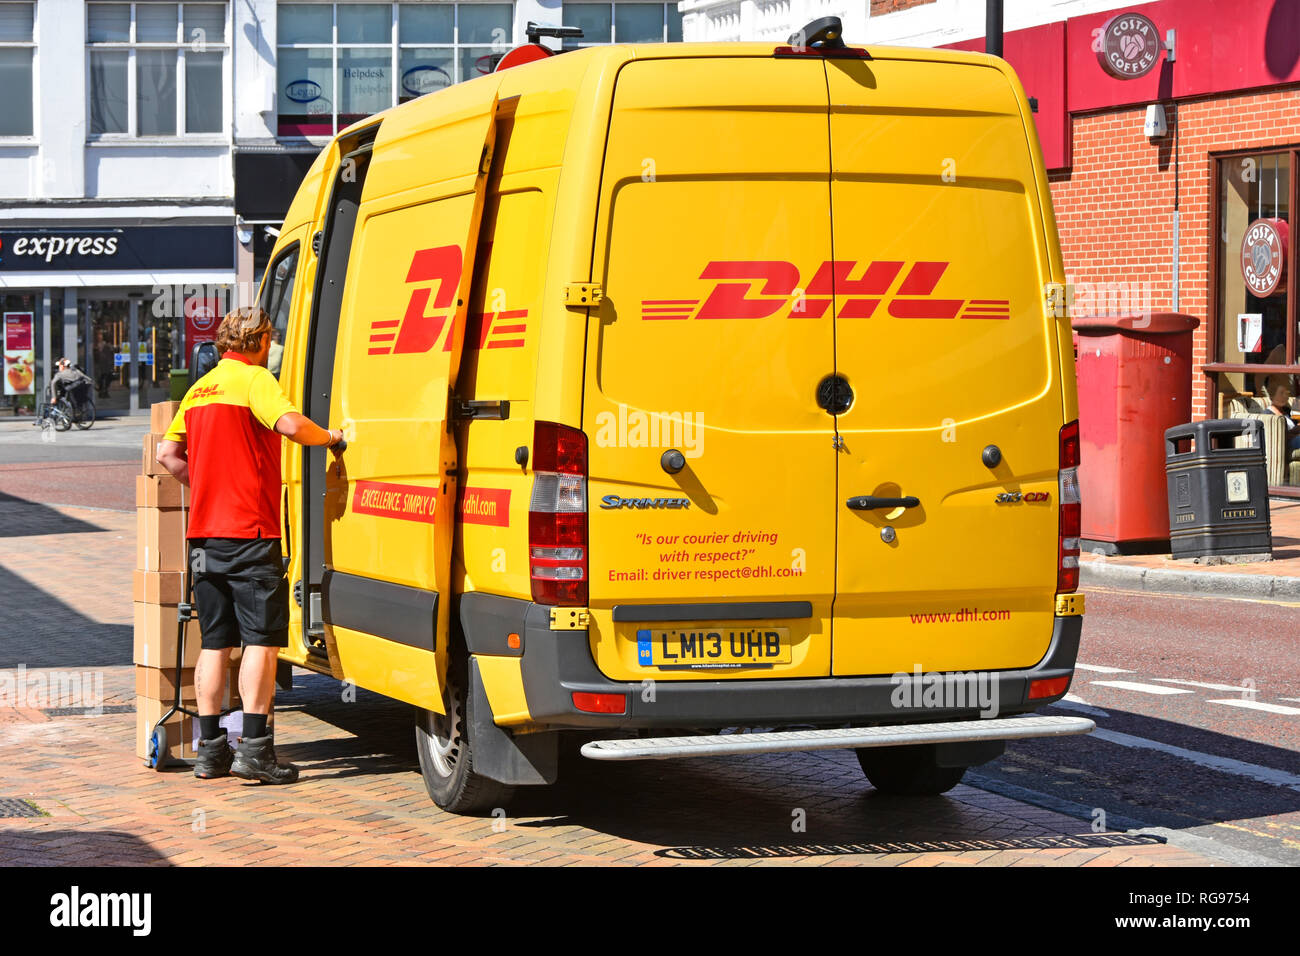 Dhl Delivery Man High Resolution Stock Photography and Images - Alamy